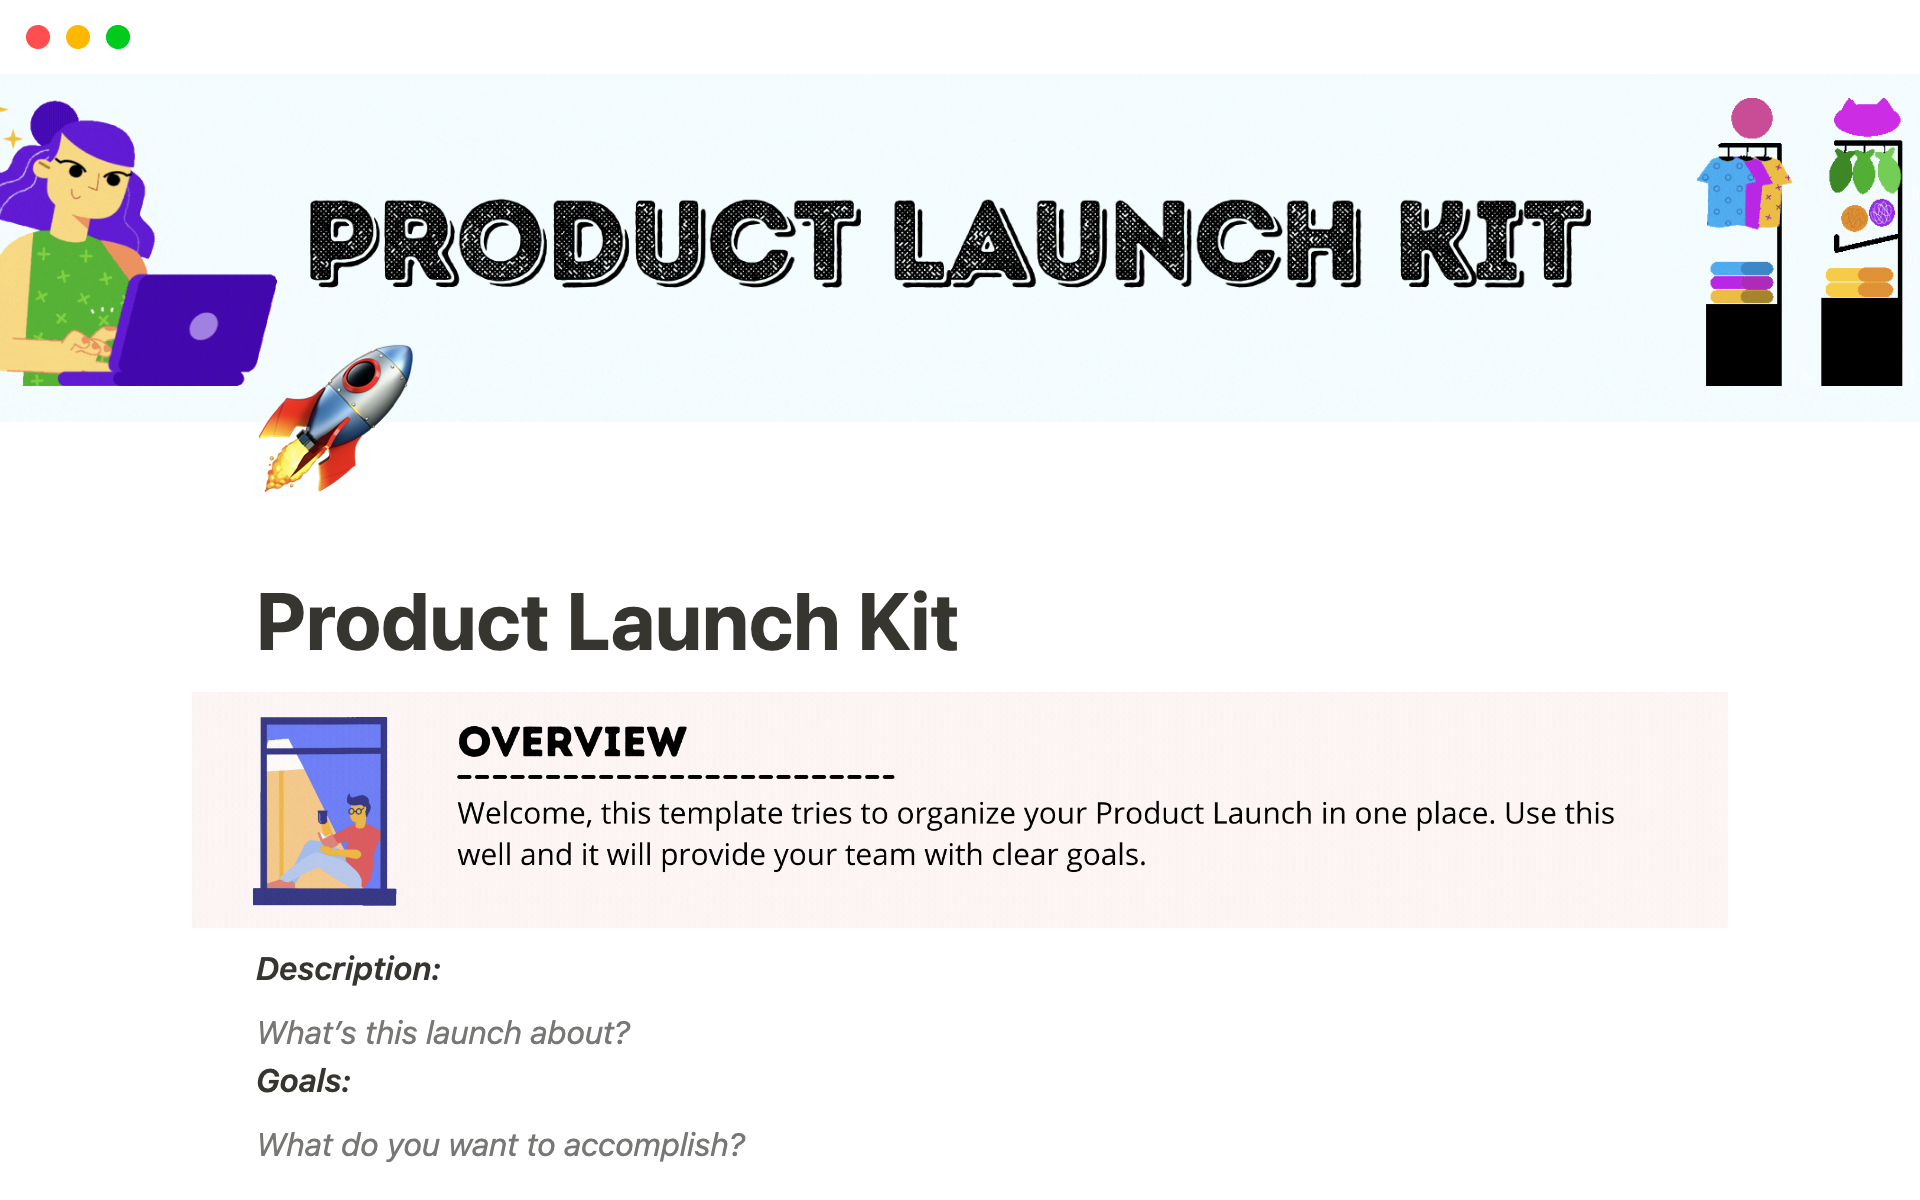 Product launch kit